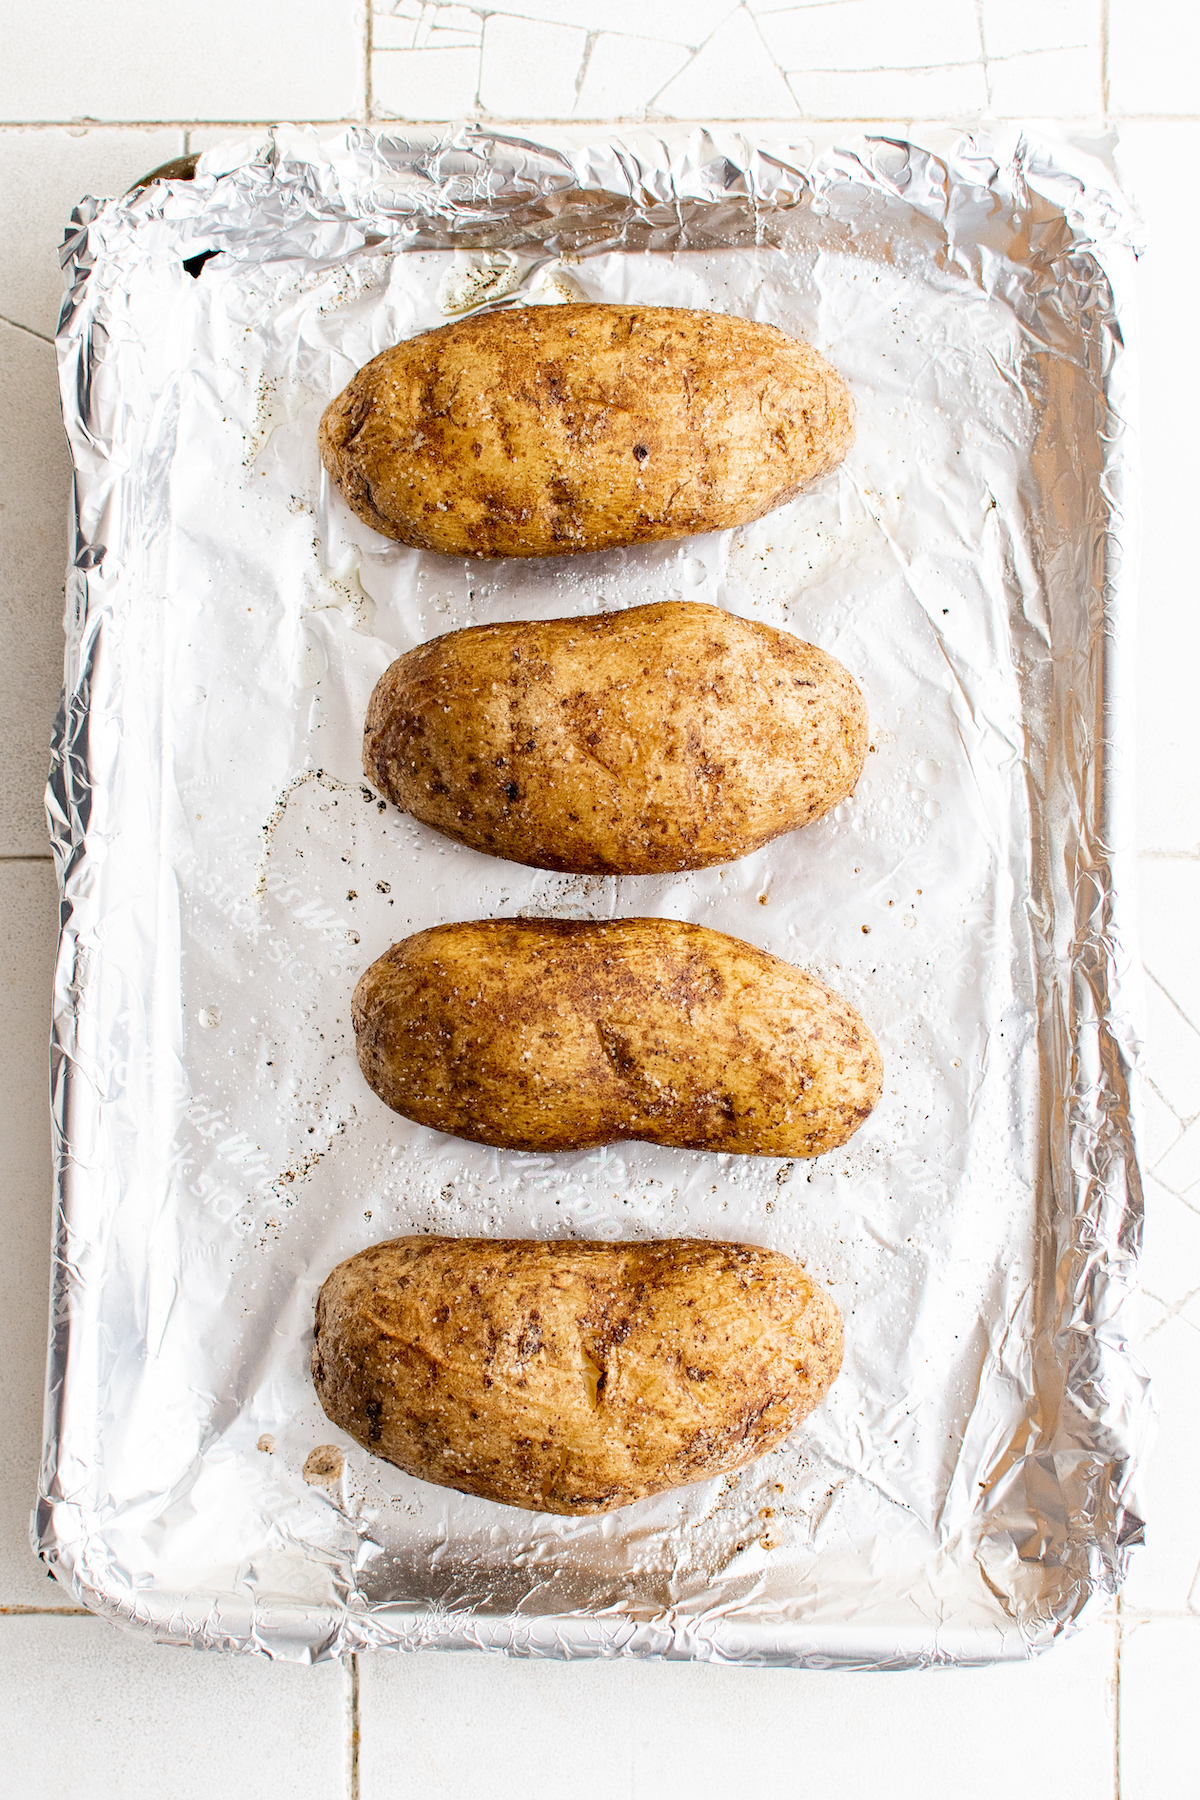 Four potatoes that have been baked on a foil-lined baking sheet.